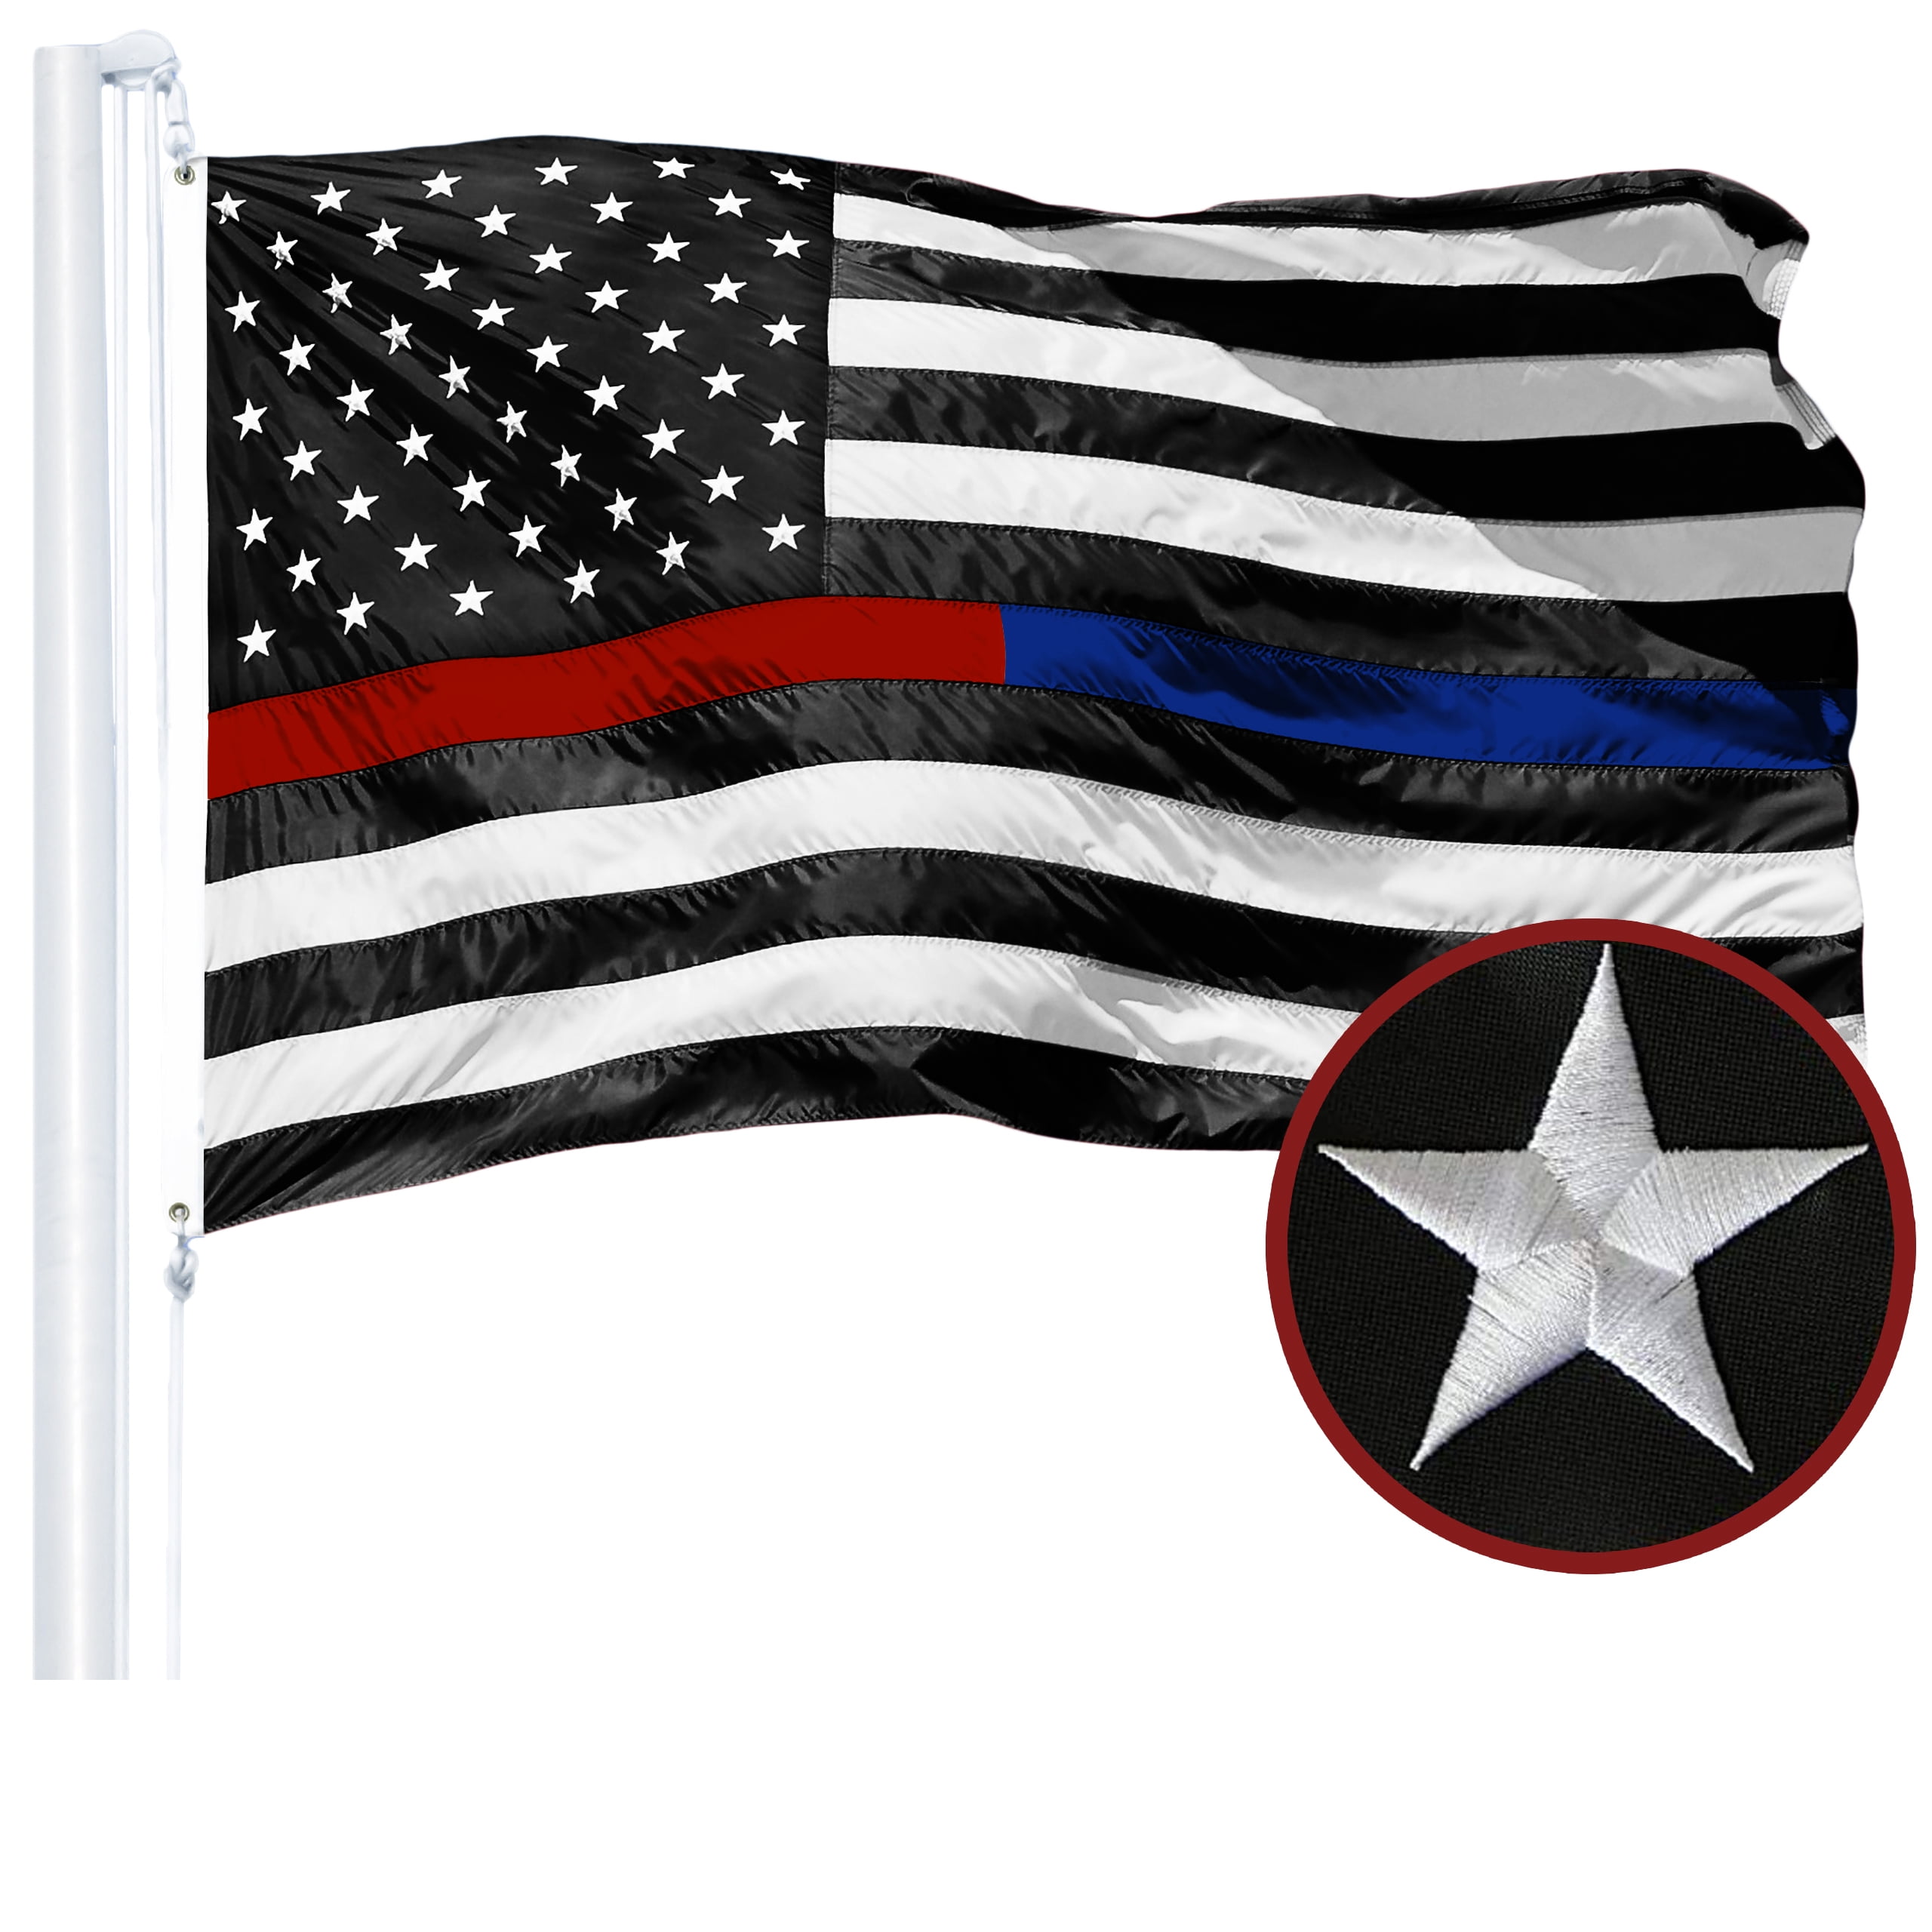 Durable National Stars and Stripes Indoor USA Flag 3x5 Ft American Outdoor 3x5 Blue Stripe American Matter Police Flags US Flags God Bless America Thin Blue Line American Flag 